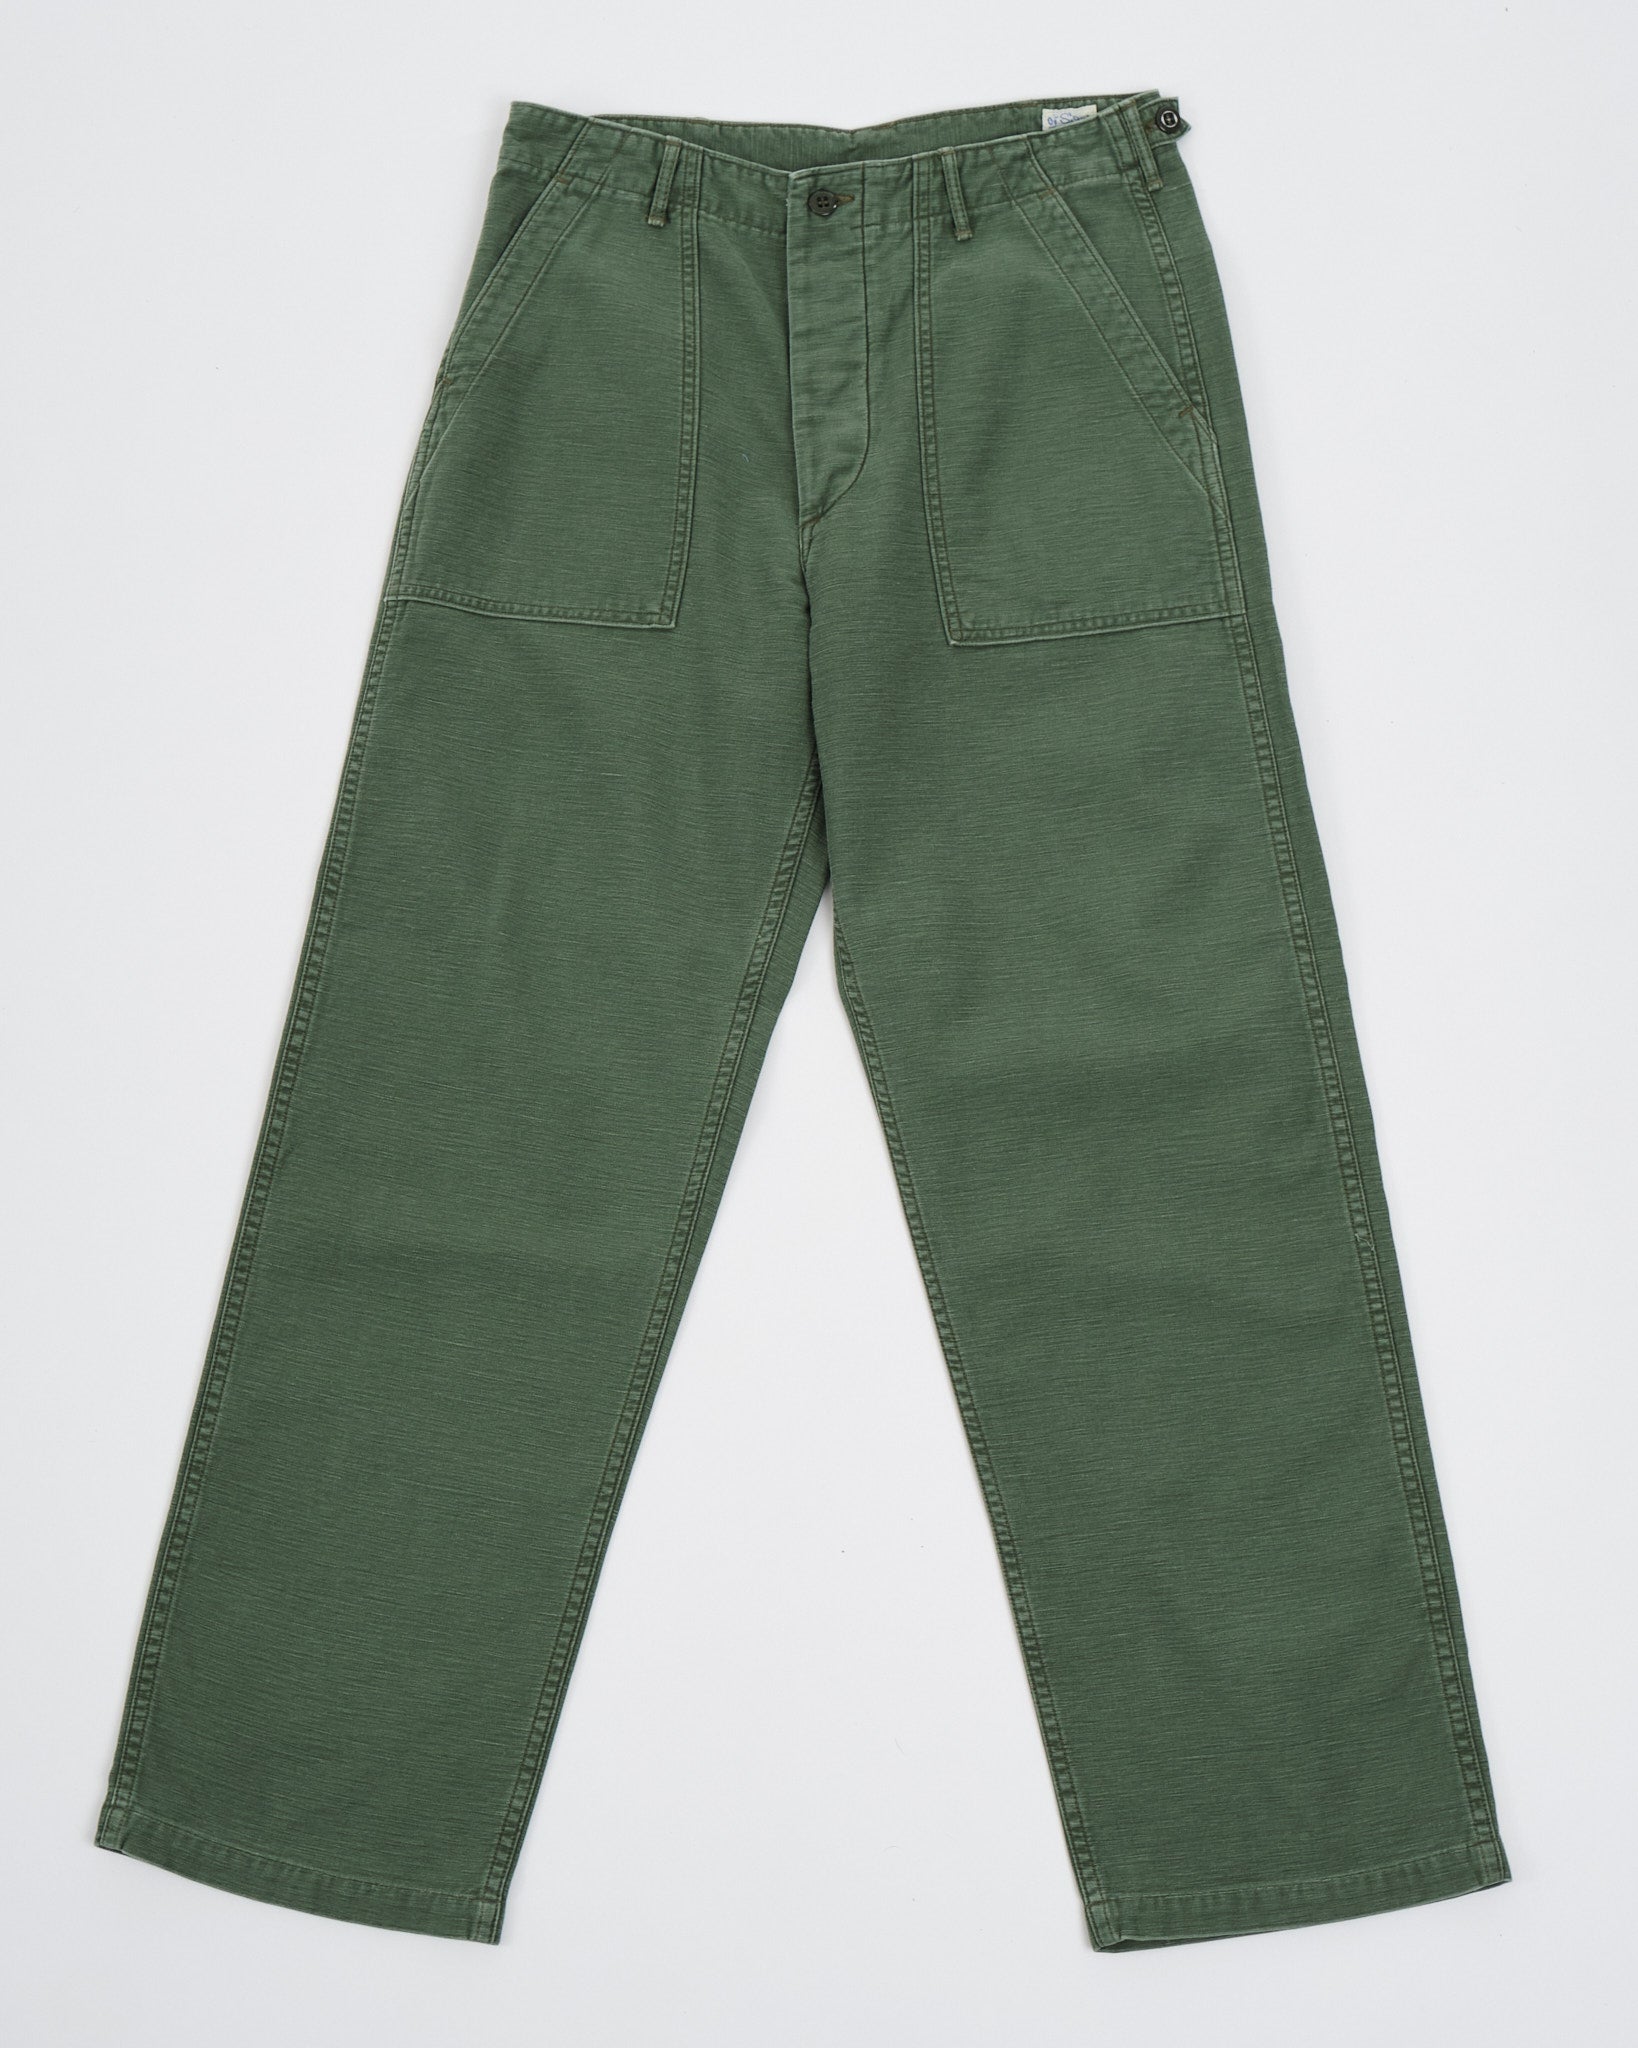 US ARMY FATIGUE PANTS GREEN USED WASH REGULAR FIT